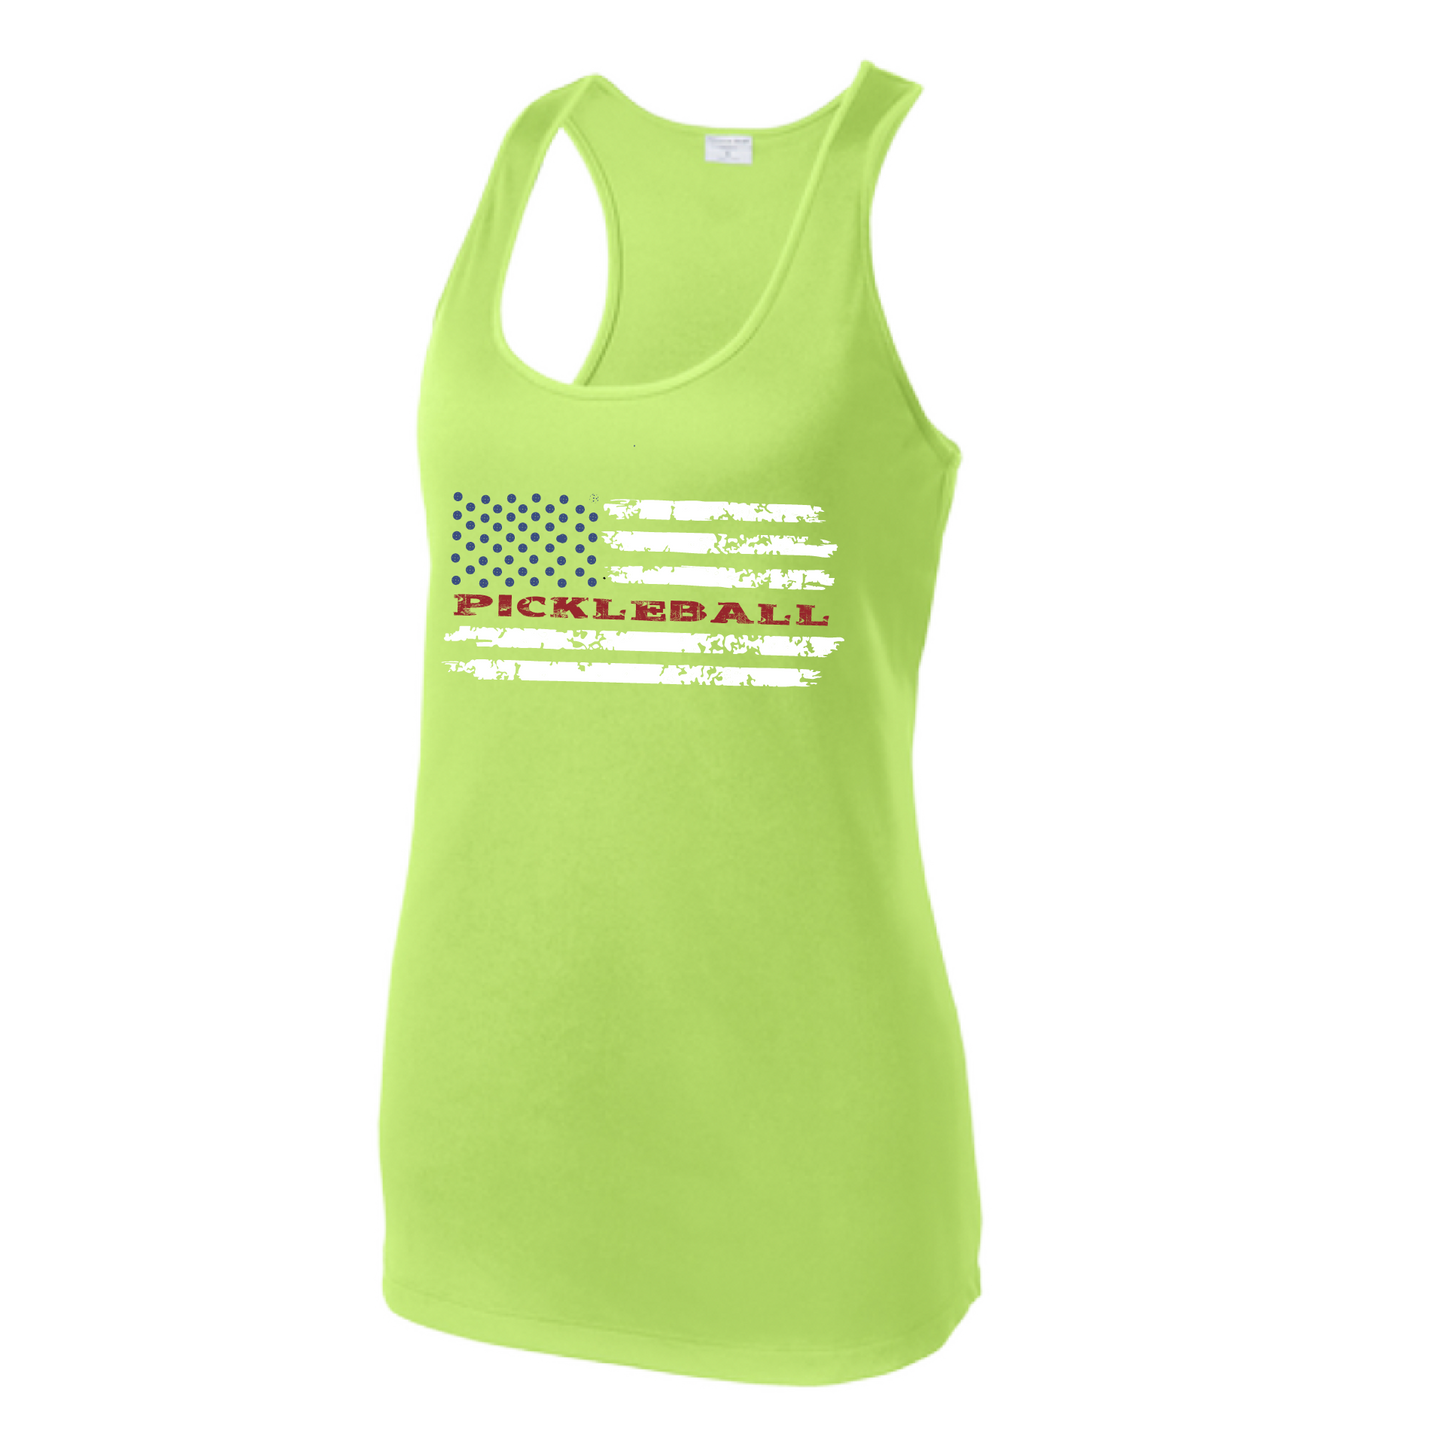 Pickleball Design: Pickleball Flag Horizontal or Vertical on Front of Shirt  Women's Style: Racerback Tank  Turn up the volume in this Women's shirt with its perfect mix of softness and attitude. Material is ultra-comfortable with moisture wicking properties and tri-blend softness. PosiCharge technology locks in color. Highly breathable and lightweight.